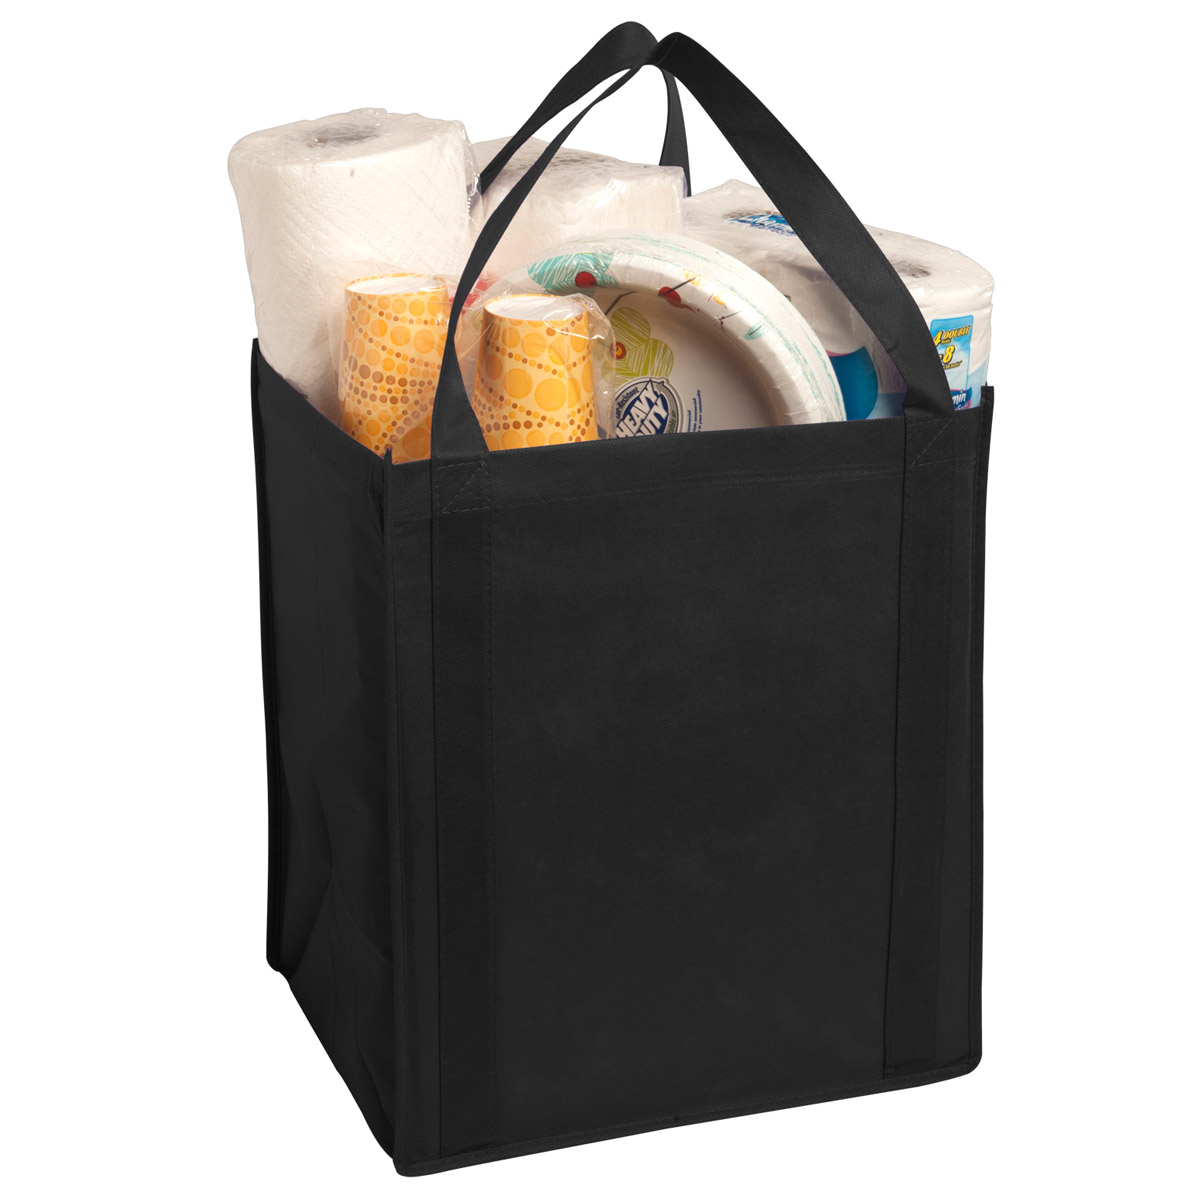 Black Large Non-Woven Grocery Tote